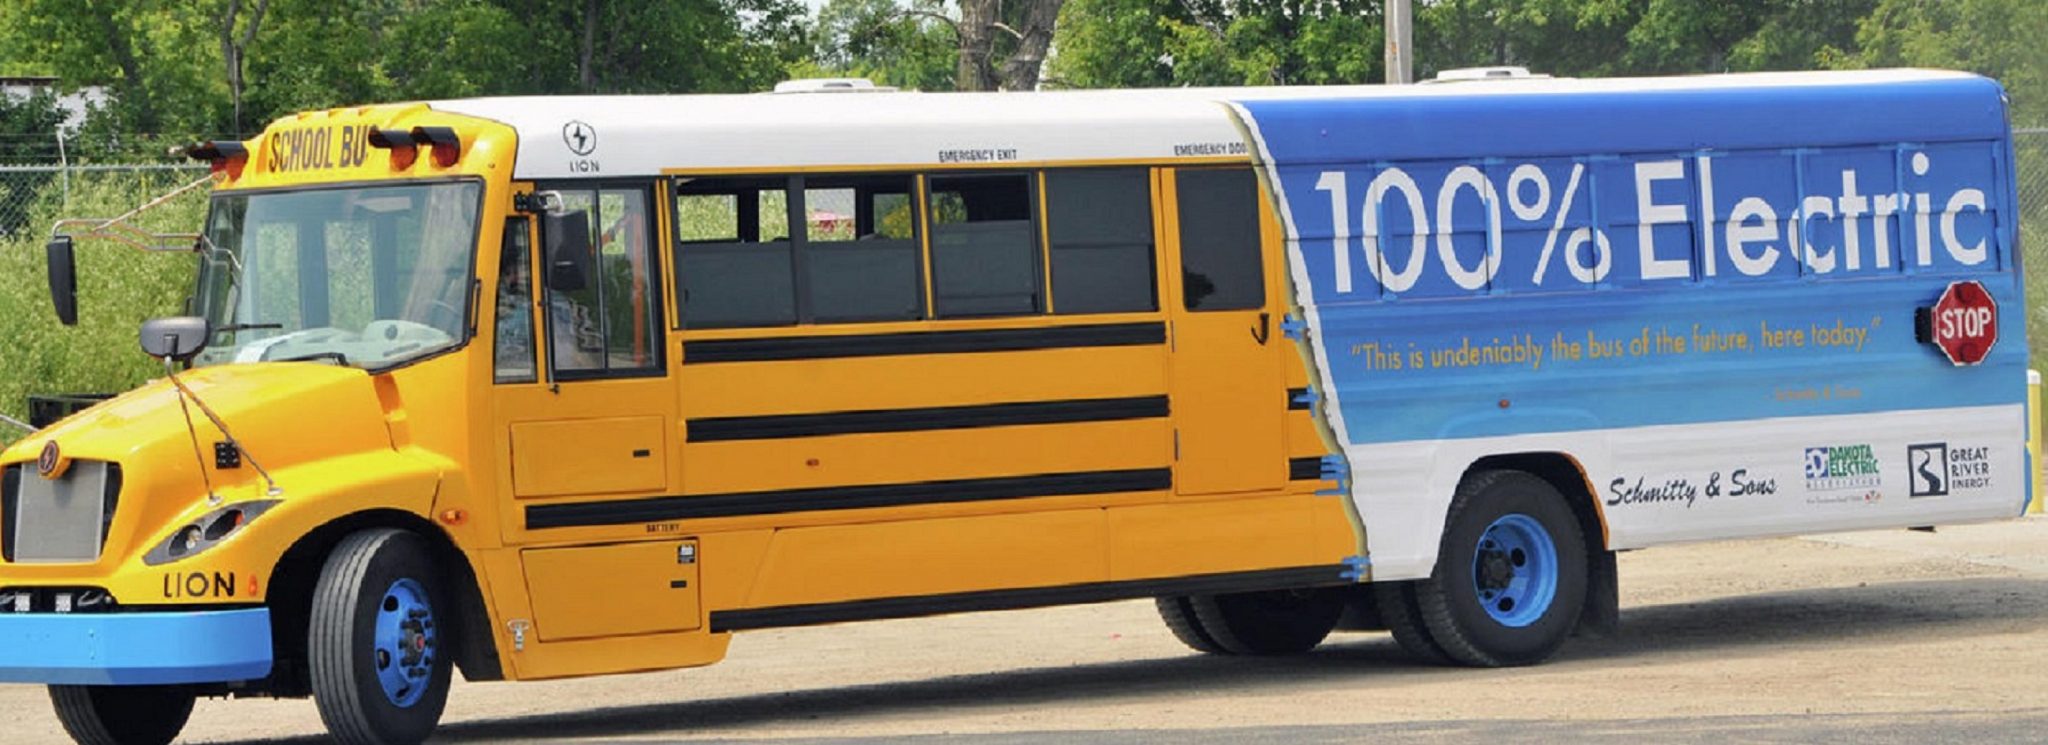 Lion All-Electric School Bus